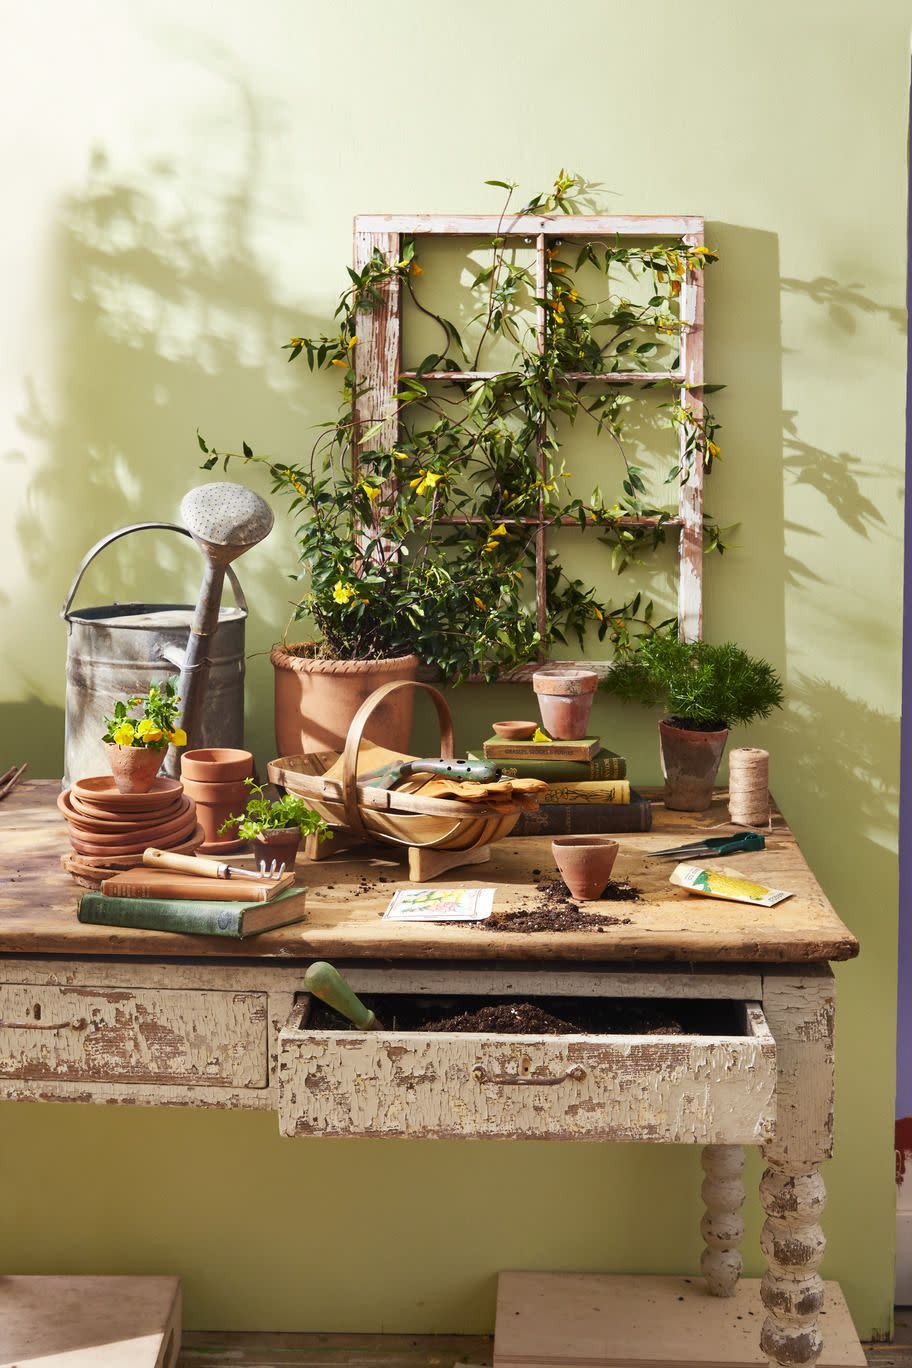 flowering potted jasmine growing up a salvaged window trellis, displayed on rustic table with pots, watering can, garden tools